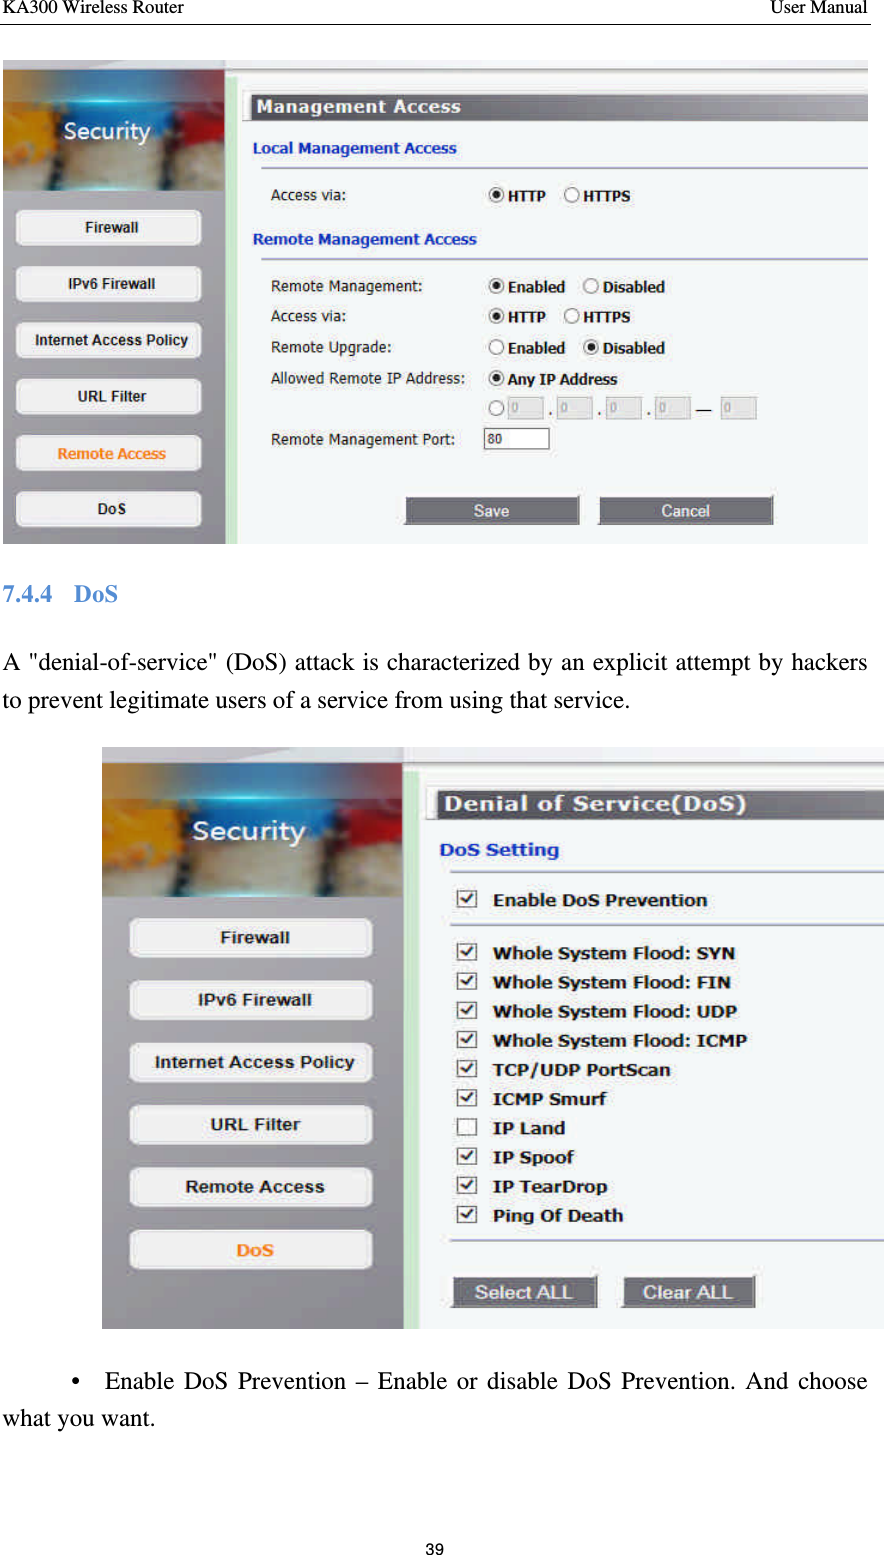 KA300 Wireless Router       User Manual 39   7.4.4    DoS A &quot;denial-of-service&quot; (DoS) attack is characterized by an explicit attempt by hackers to prevent legitimate users of a service from using that service.          •  Enable DoS Prevention – Enable or disable DoS Prevention. And choose what you want. 